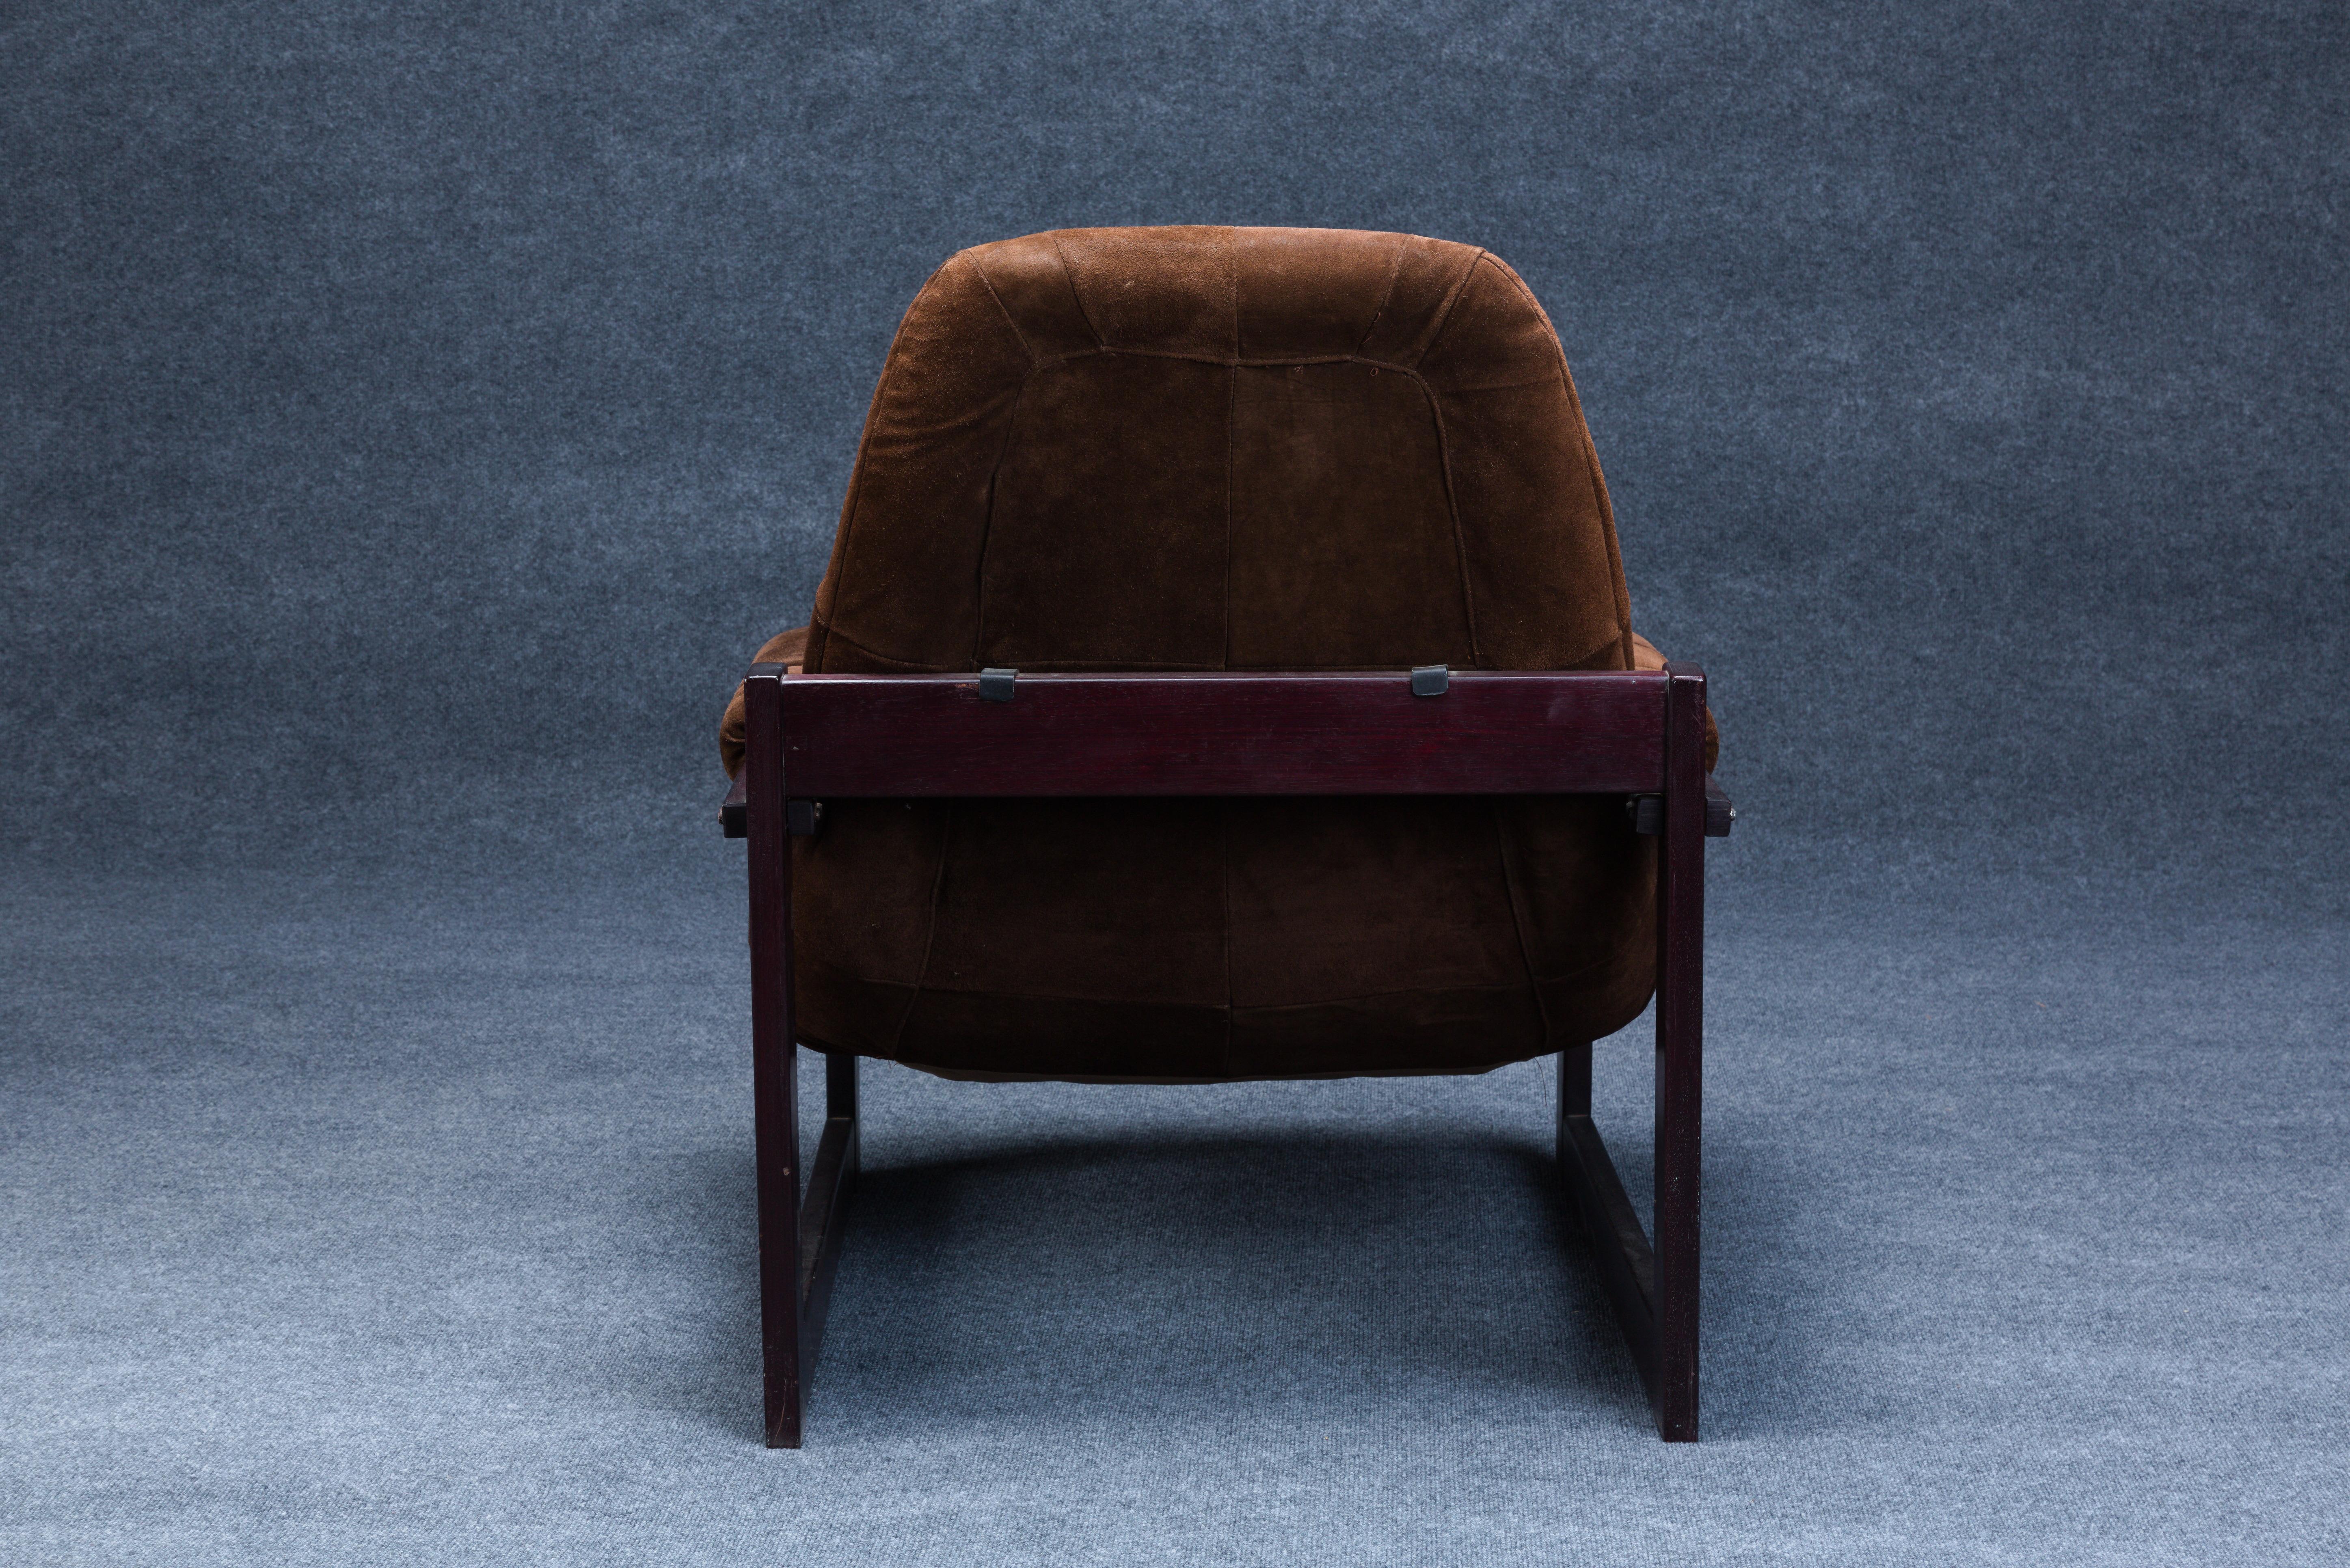 Leather Percival Lafer Brazilian Rosewood Lounge Chair and Ottoman, c. 1965